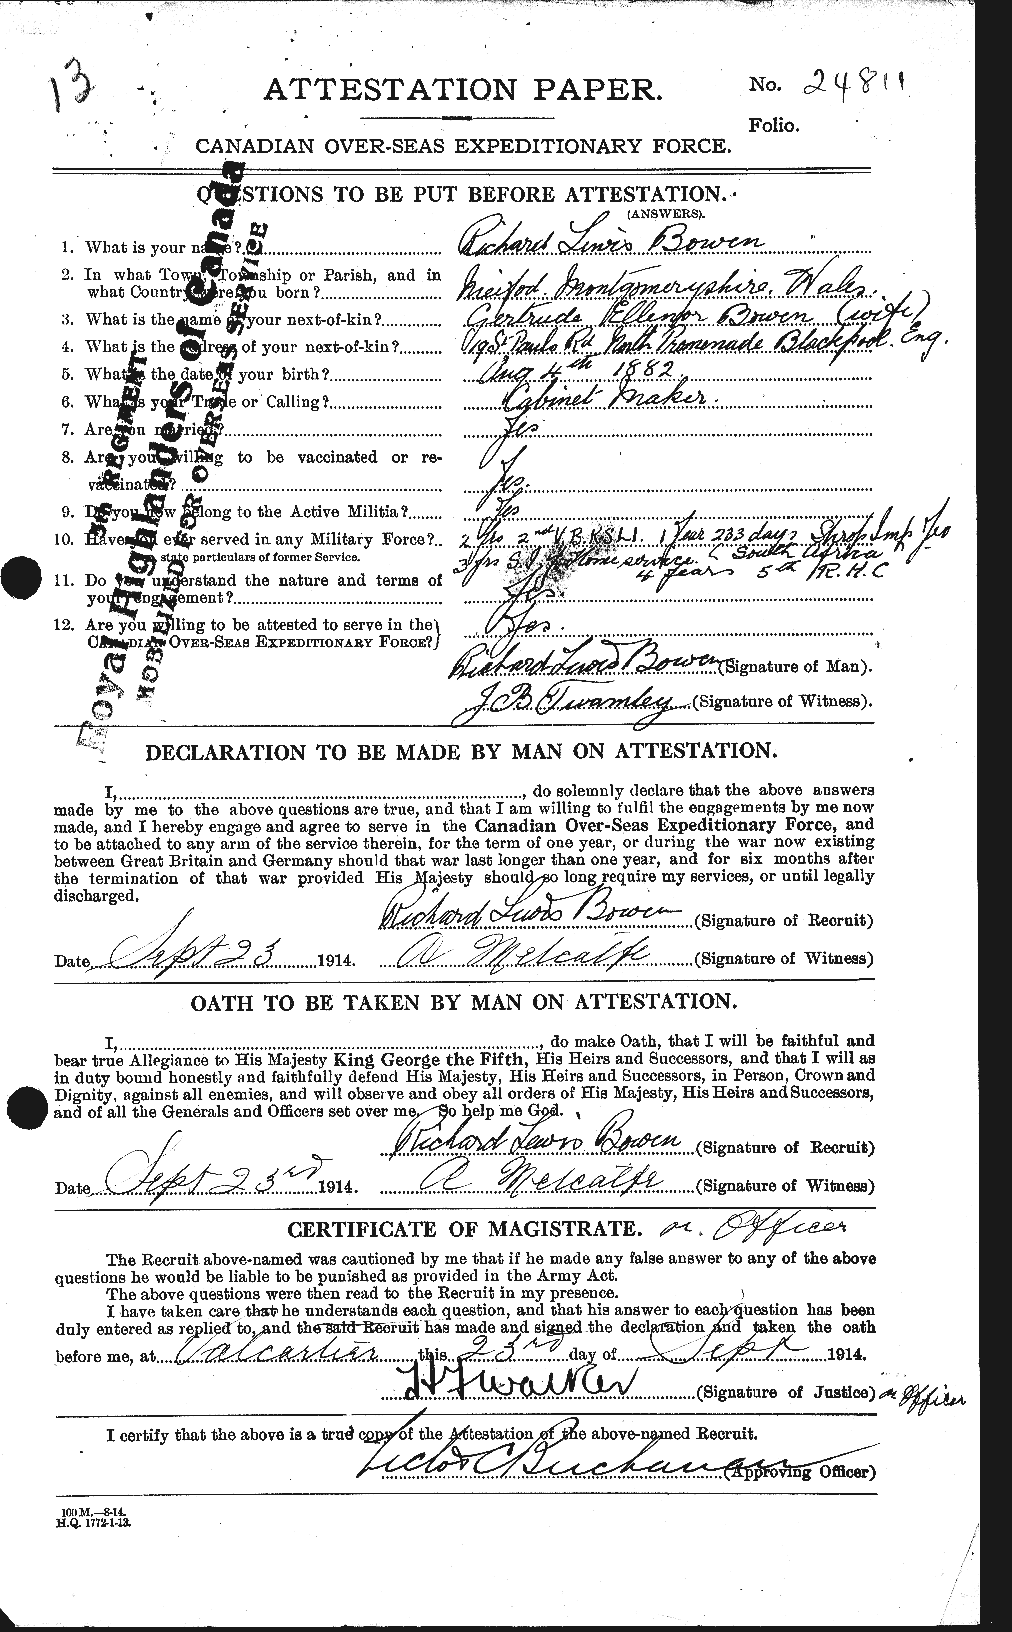 Personnel Records of the First World War - CEF 255460a